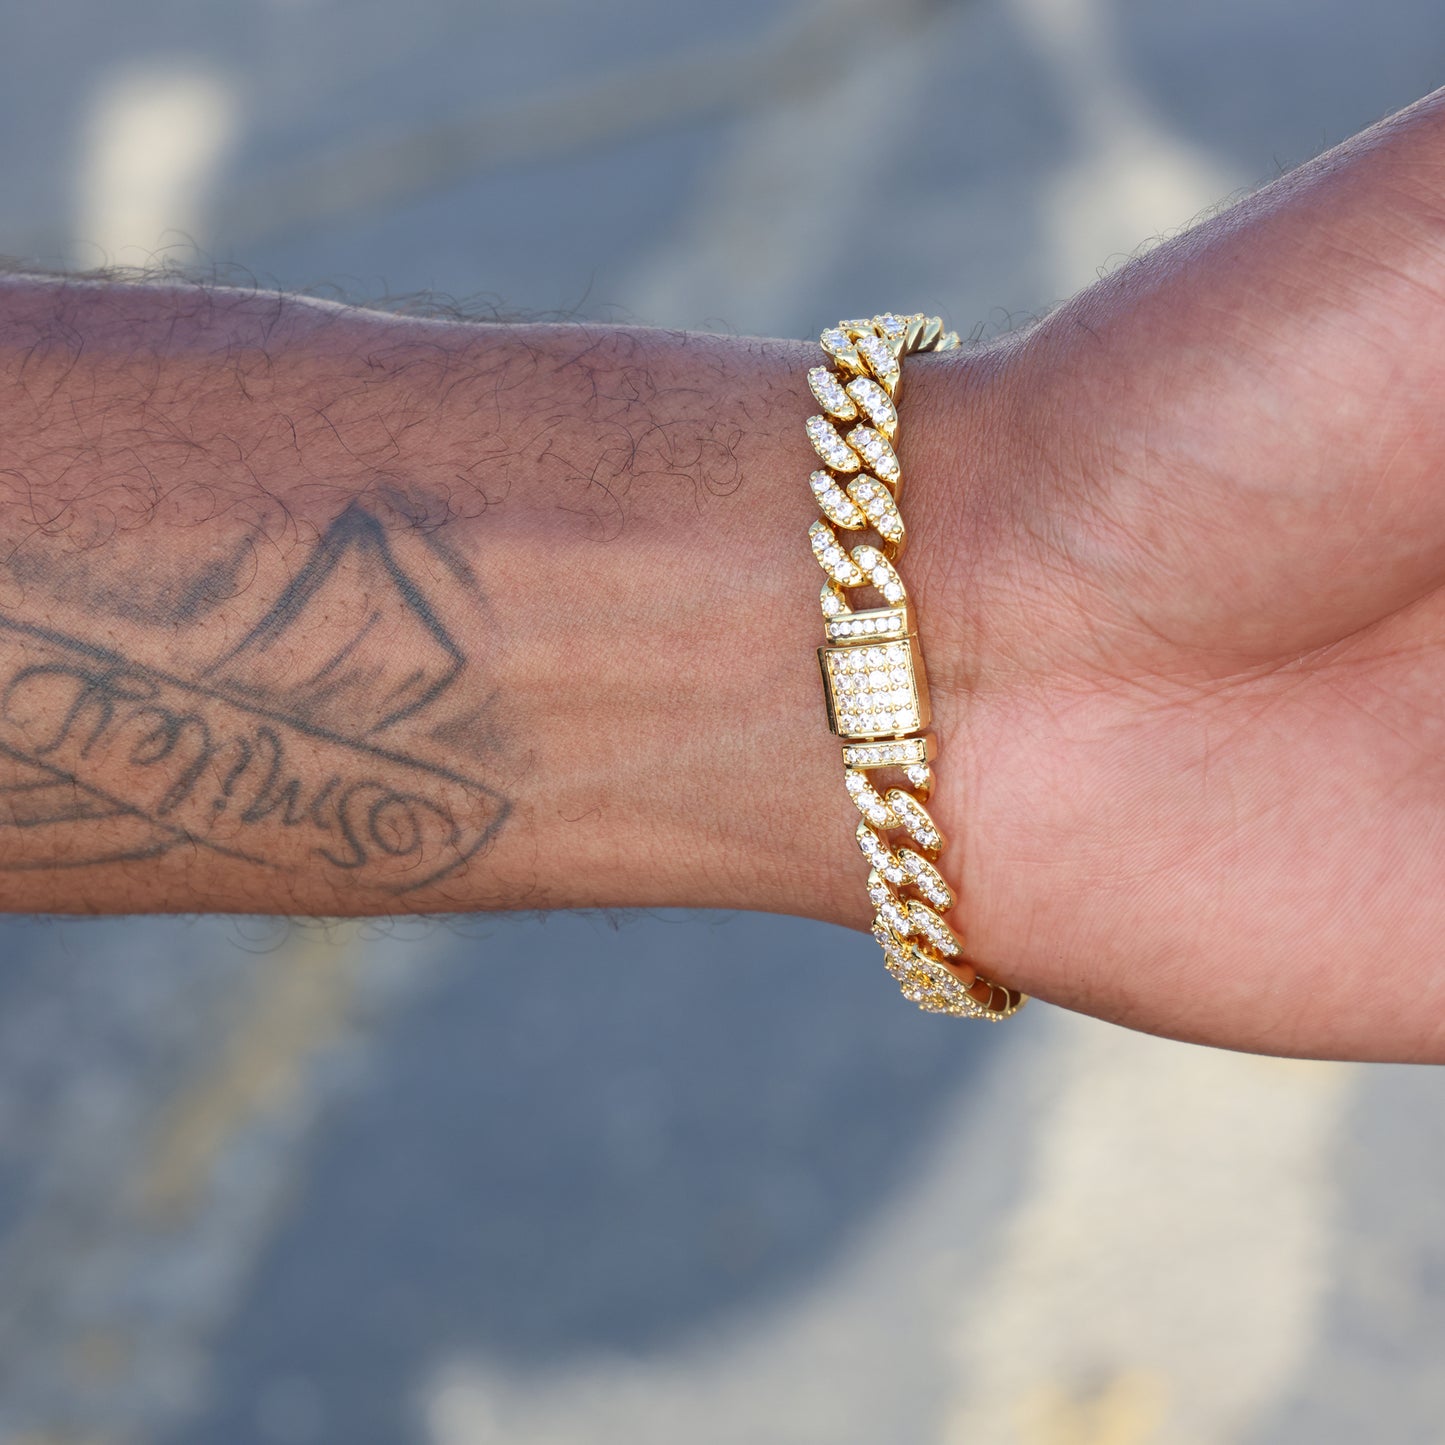 8mm Iced Out Cuban Bracelet - Gold